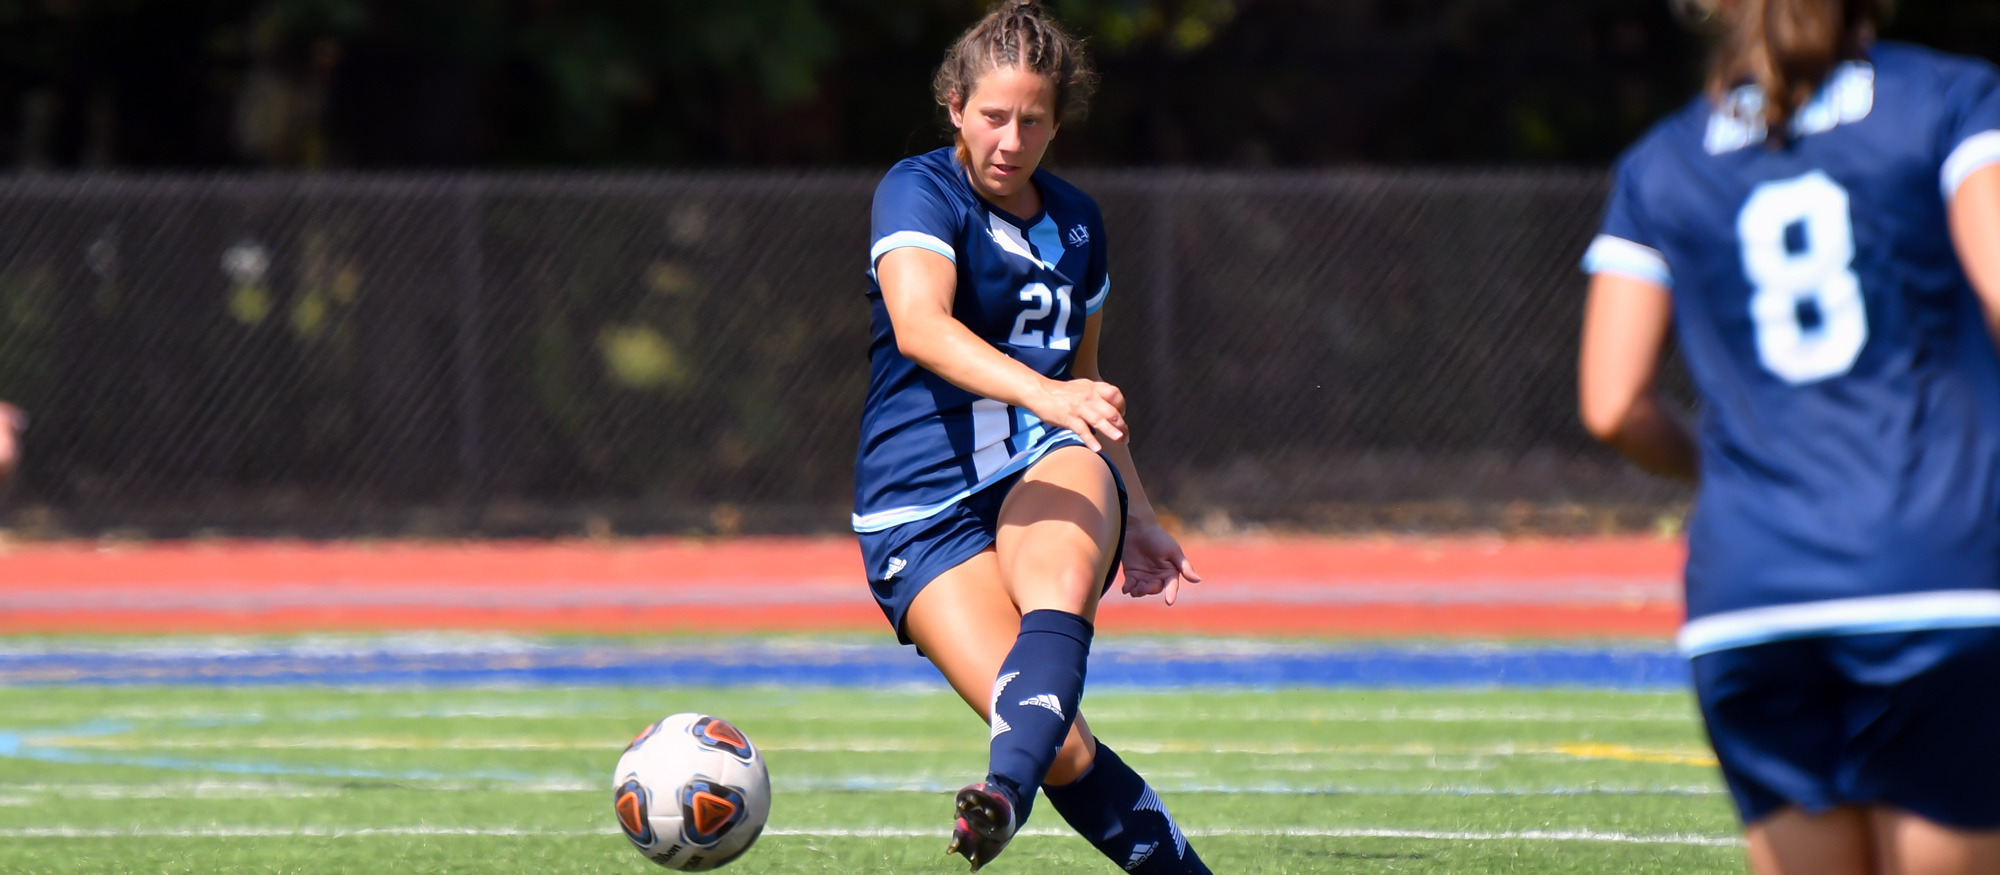 Anna Kennedy netted her first collegiate goal on an assist from Hannah Keochakian in Mount Holyoke's 2-1 loss to Emmanuel on Sept. 22, 2022. (RJB Sports file photo)